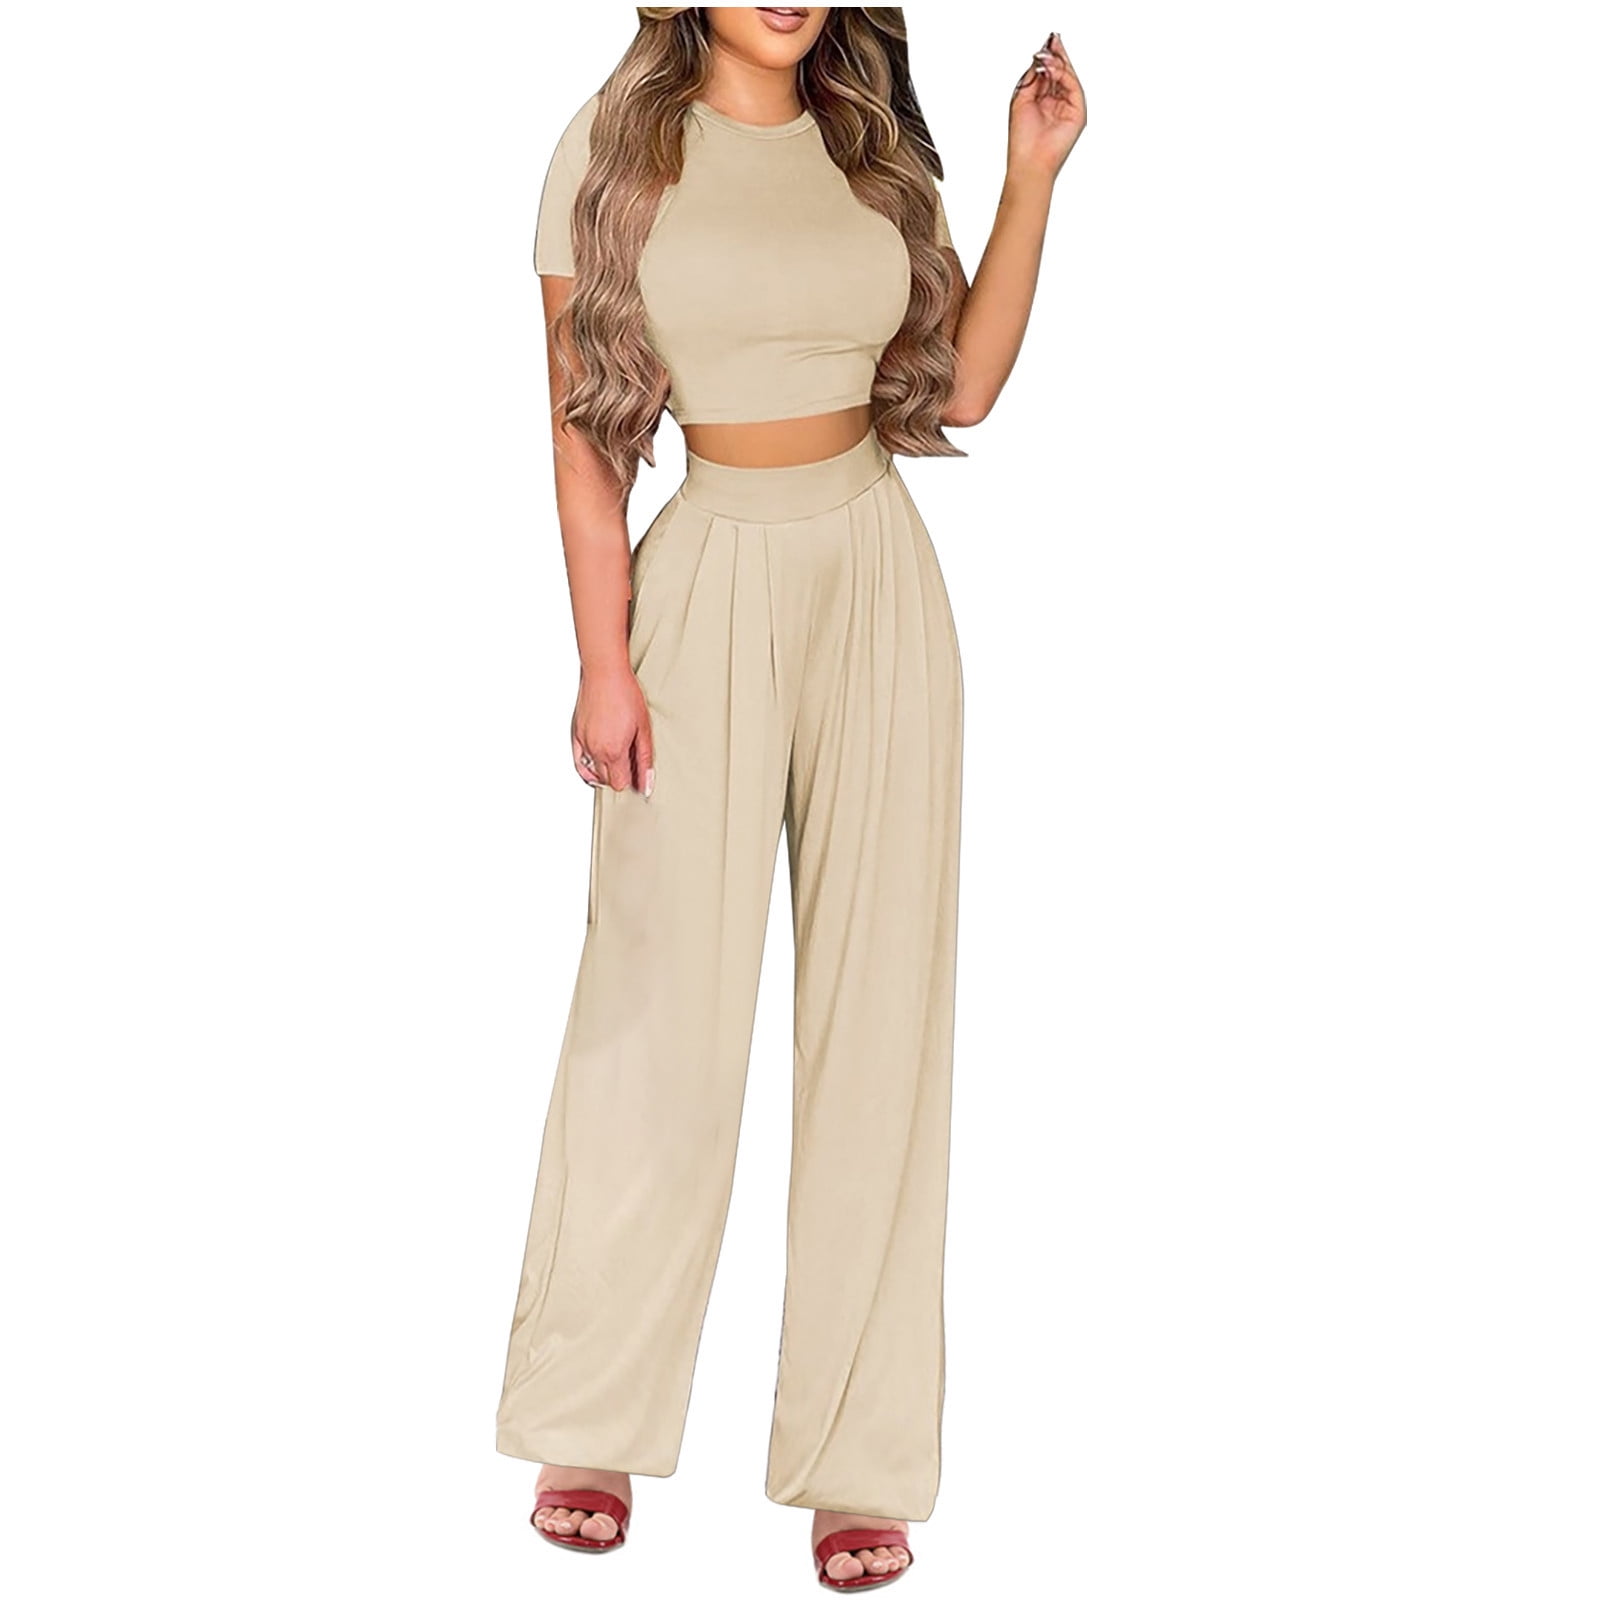 YWDJ 2 Piece Outfits for Women Pants Sets Elegant Fashion Summer